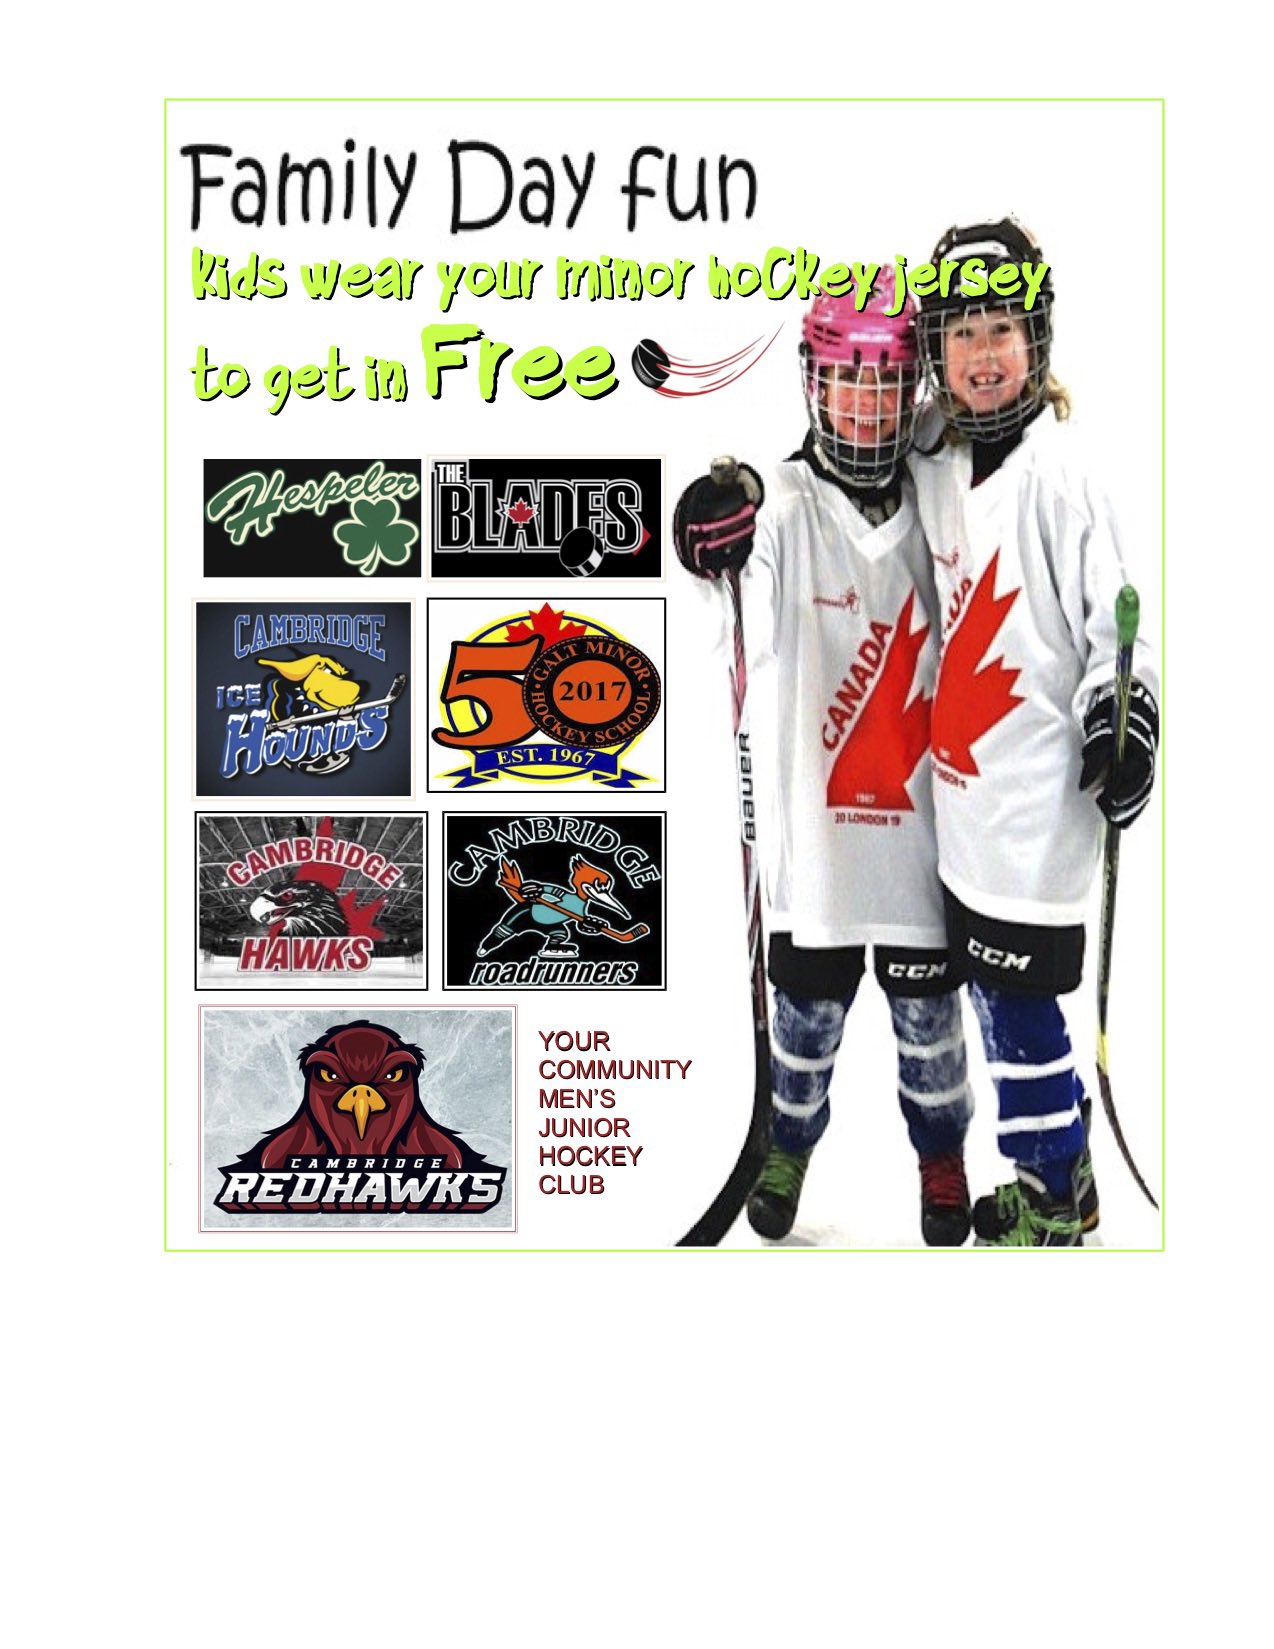 Hockey Gear & Uniforms for Teams, Leagues and Families